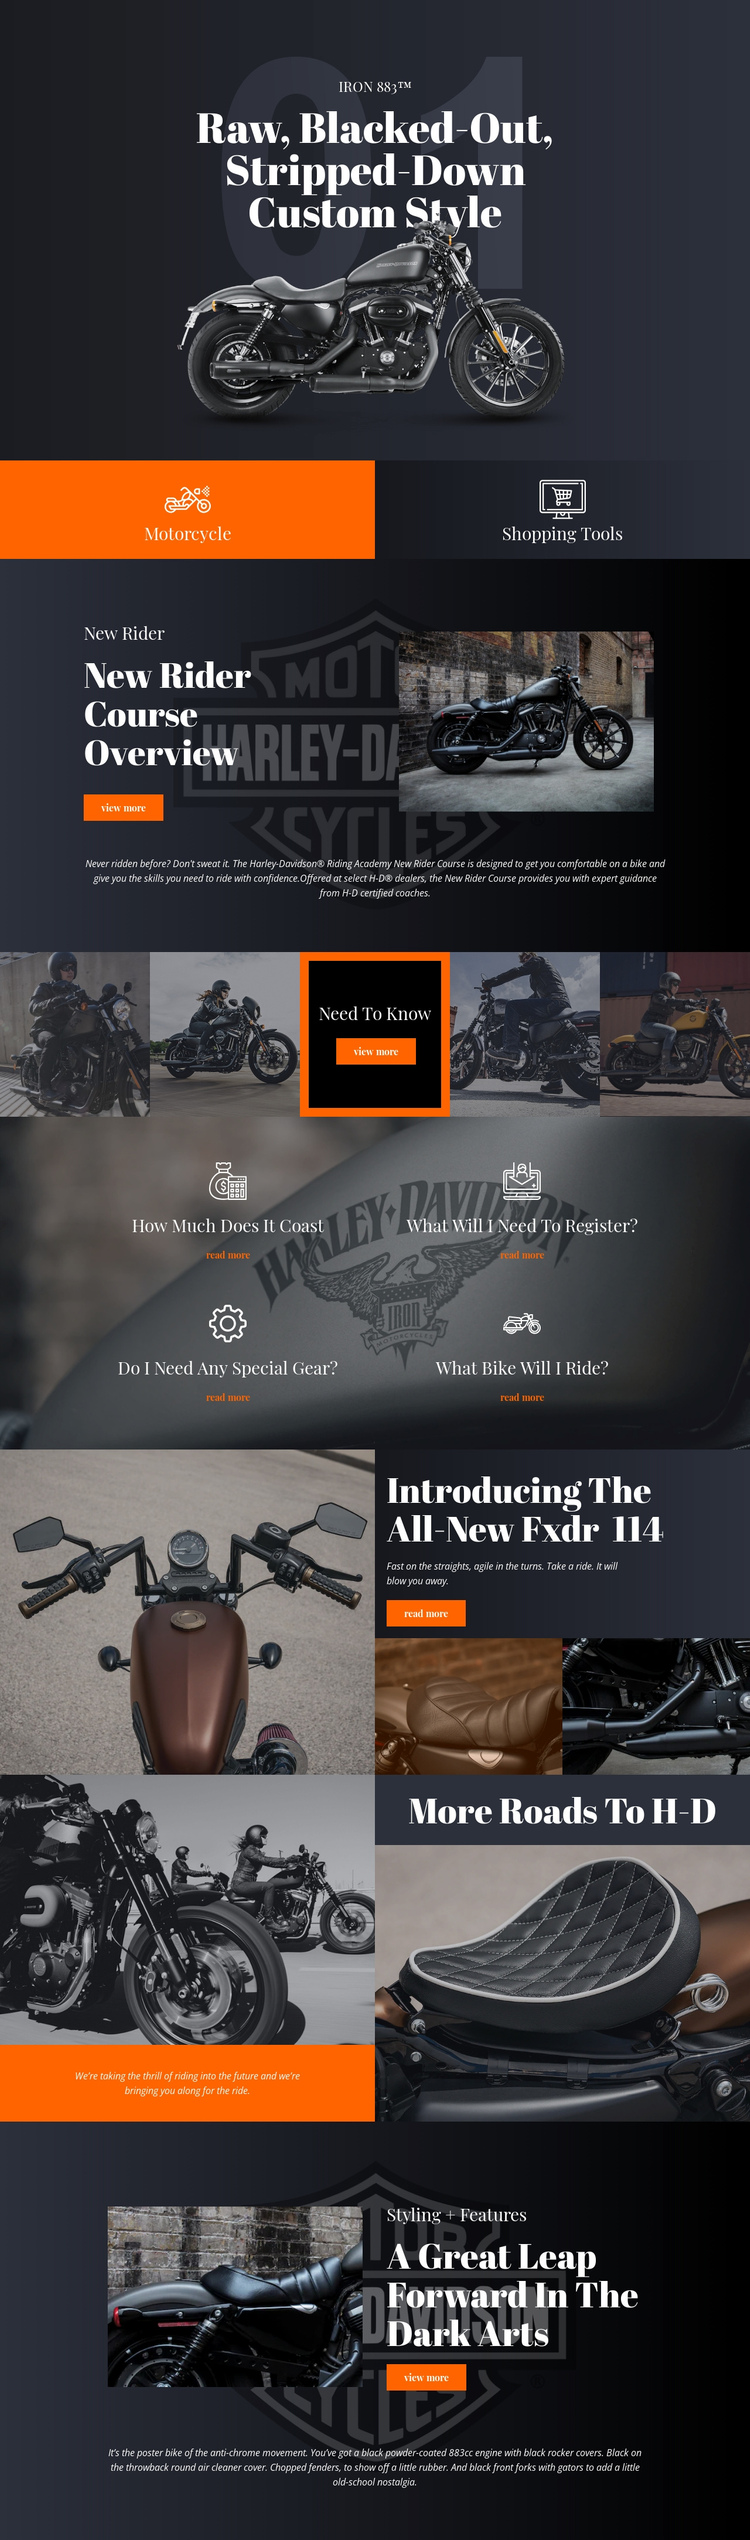 Harley Davidson One Page Template